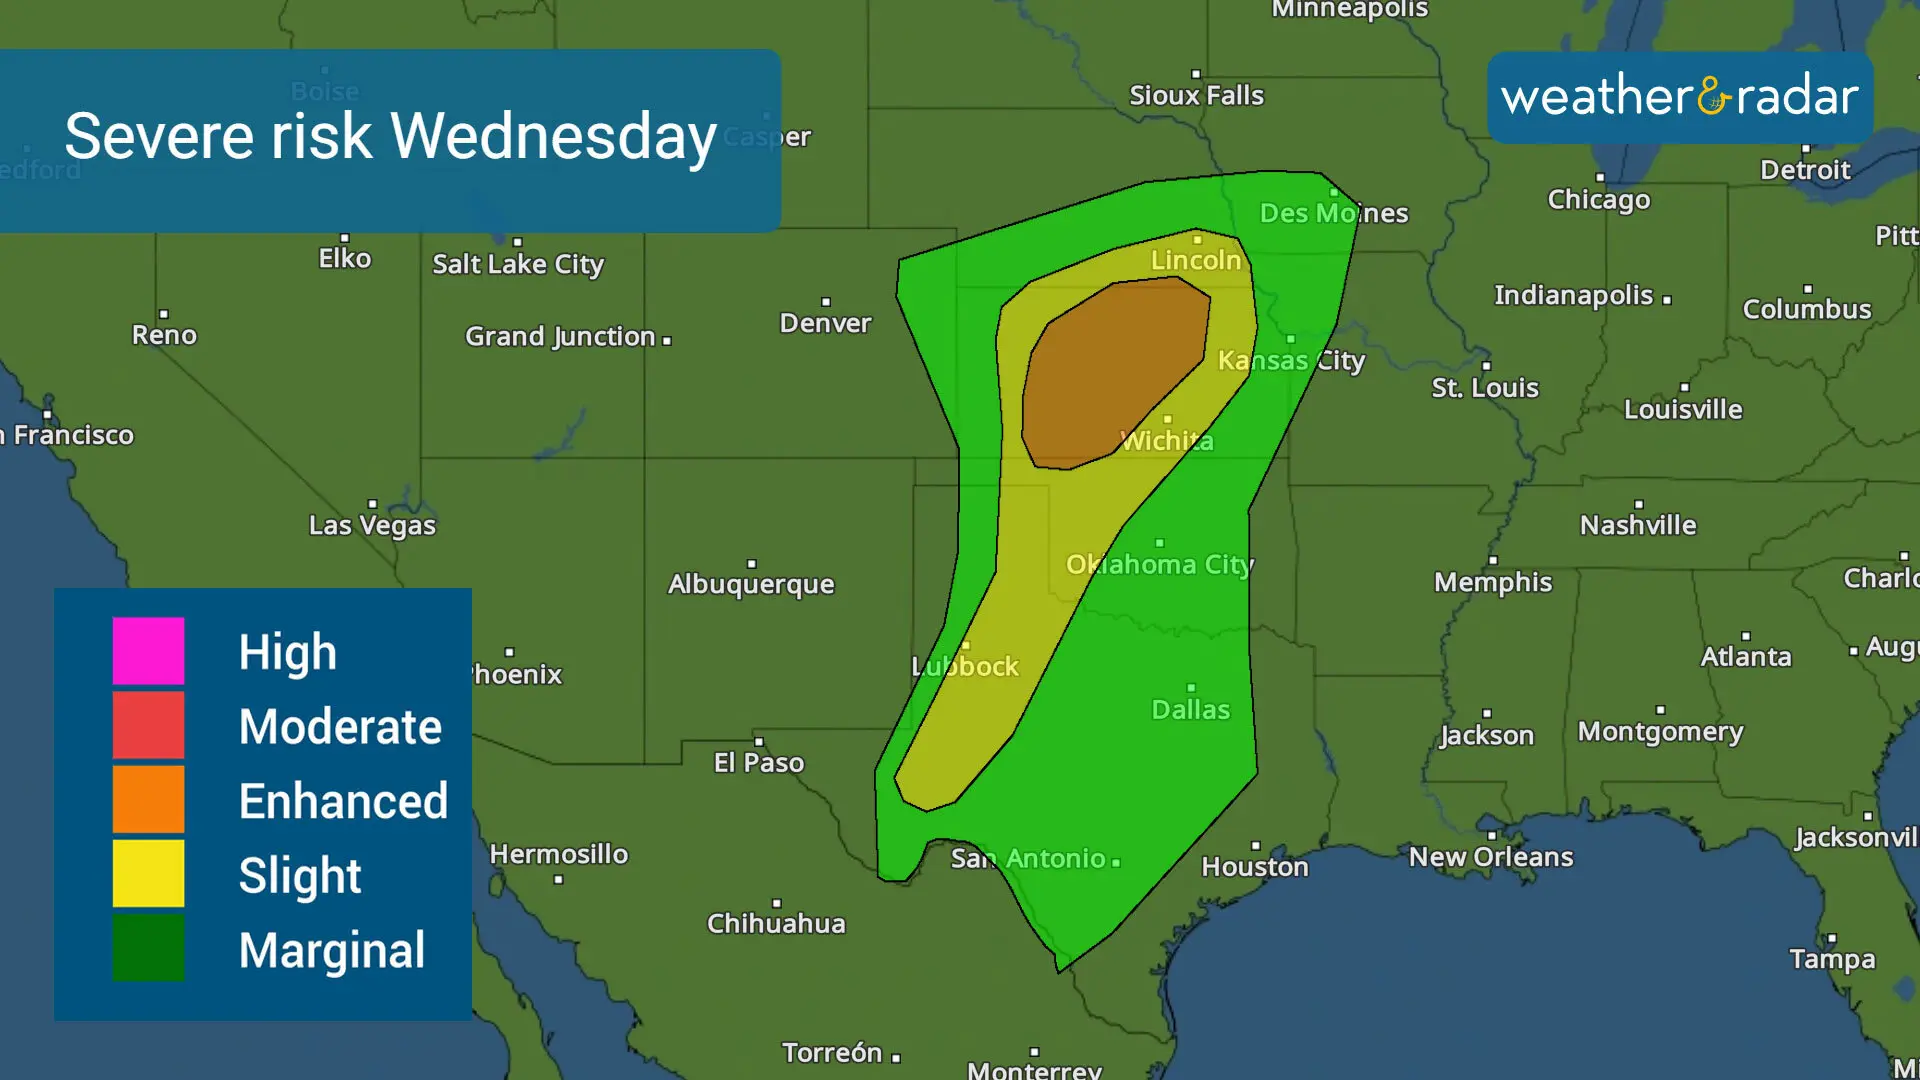 Another system intensifies and renews the severe risk across the Central Plains. 